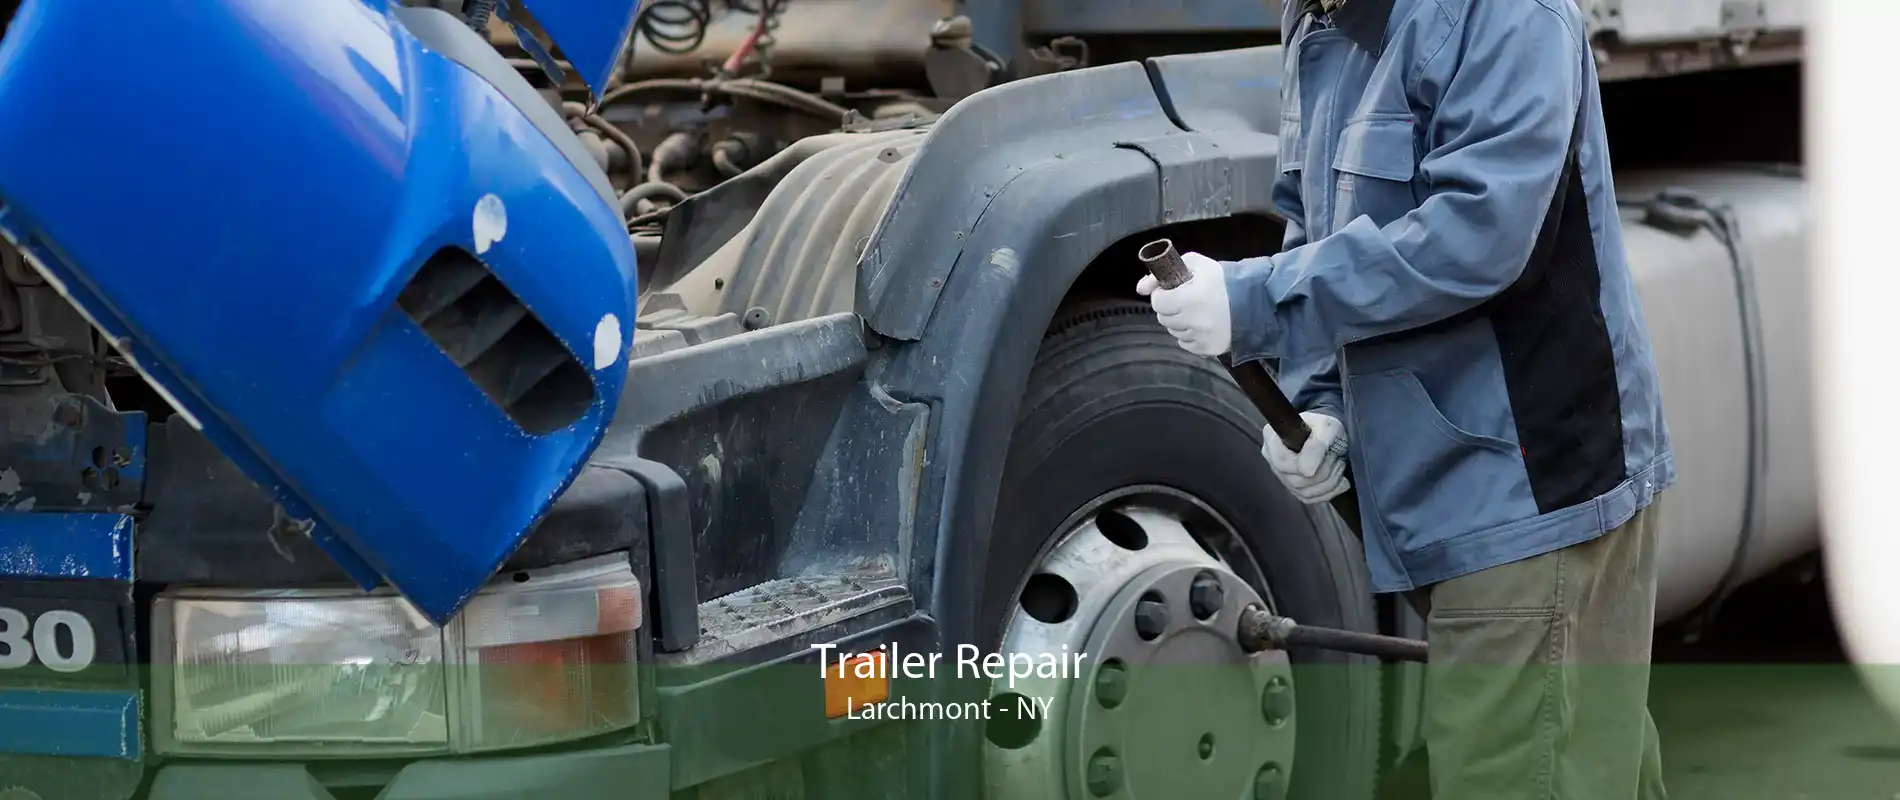 Trailer Repair Larchmont - NY